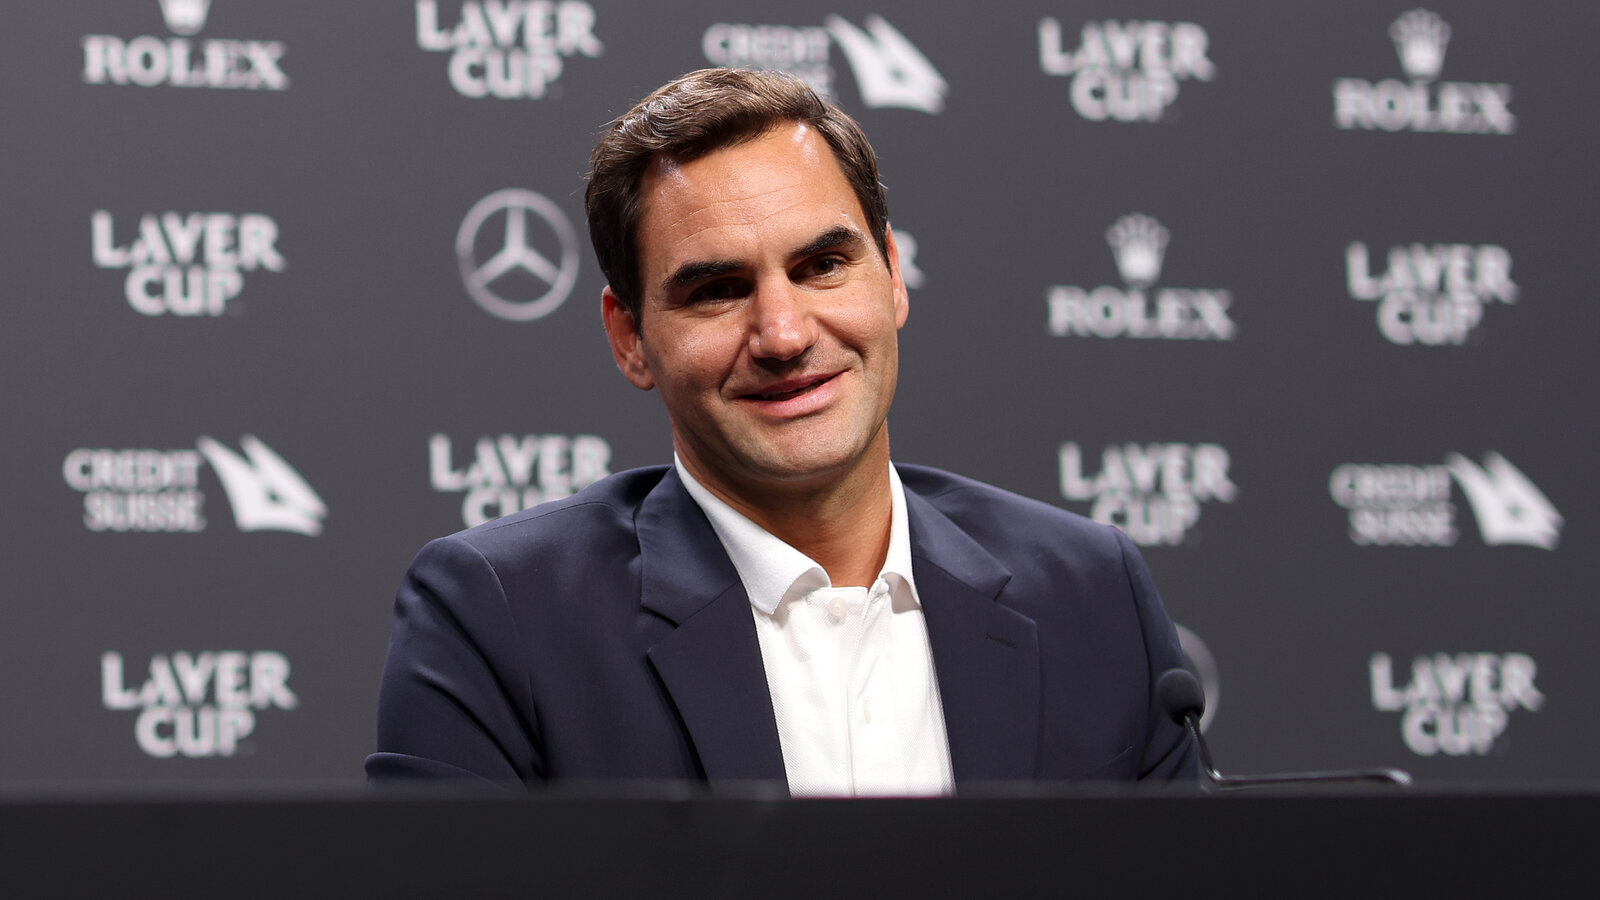 Roger Federer Says Doubles Match With Nadal Could Be His Last